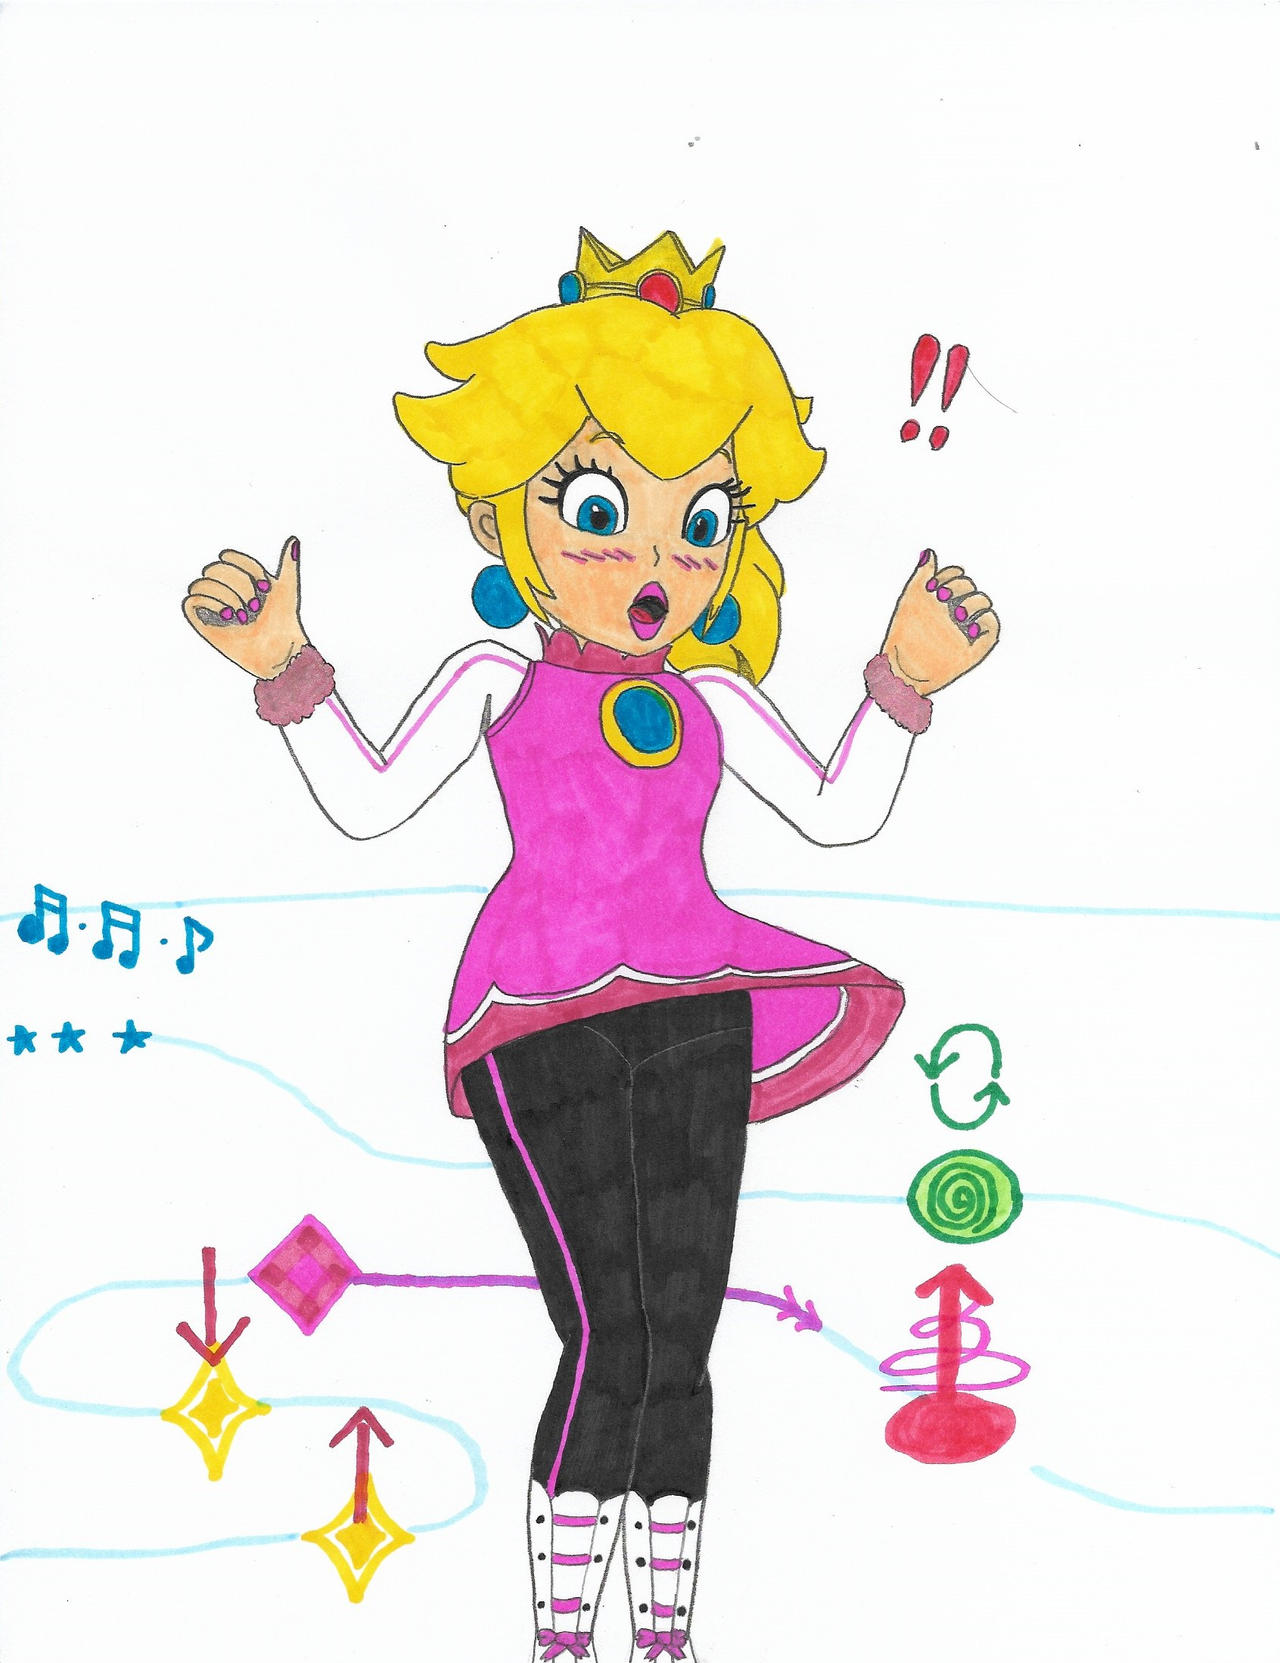 You can do it Peach! by buena17valle on DeviantArt